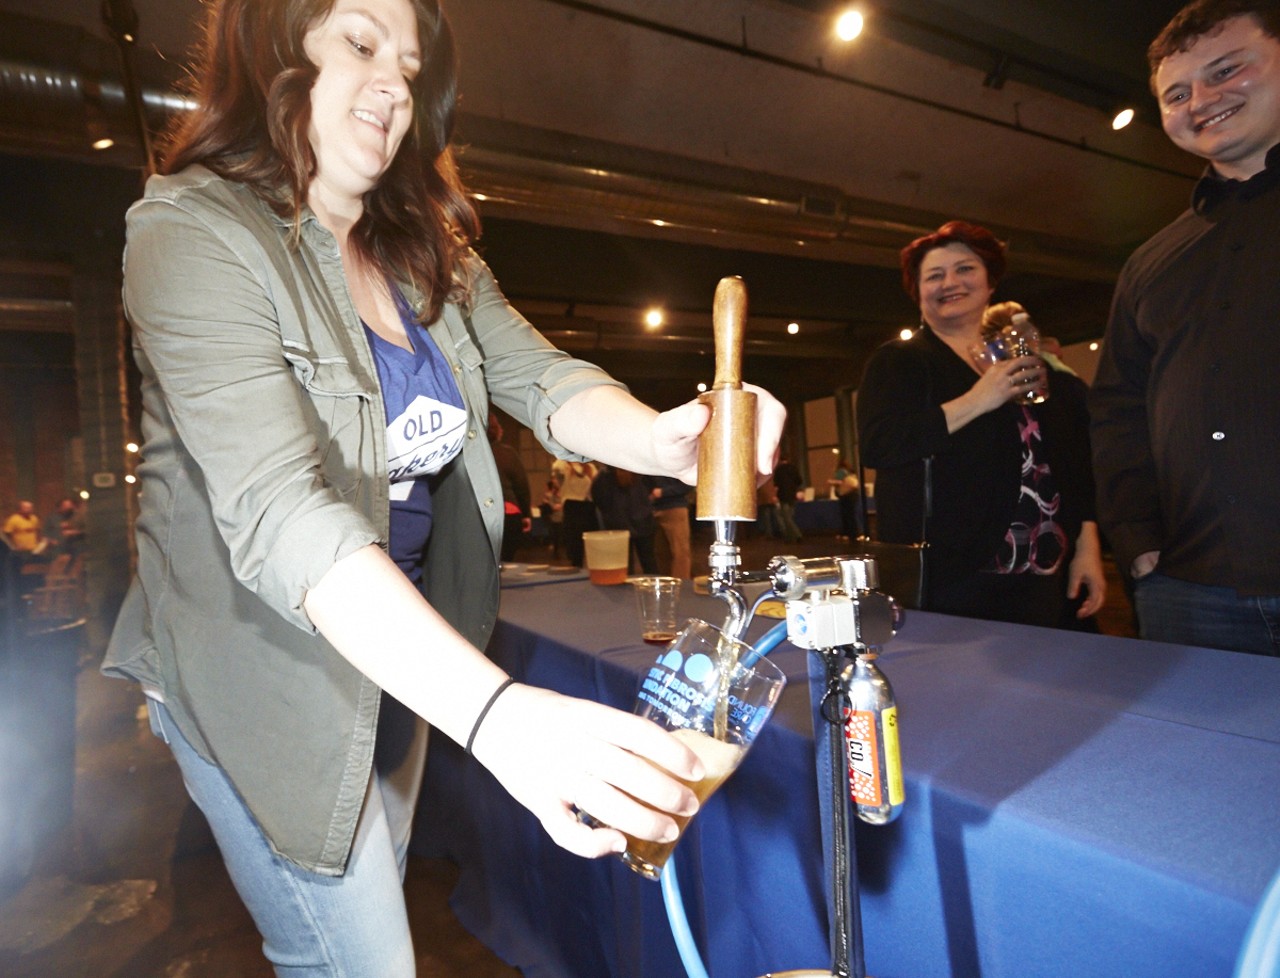 Kayla Knoll, from Old Bakery Beer, pours a beer for mother and mon Laura and Brian Hunter.